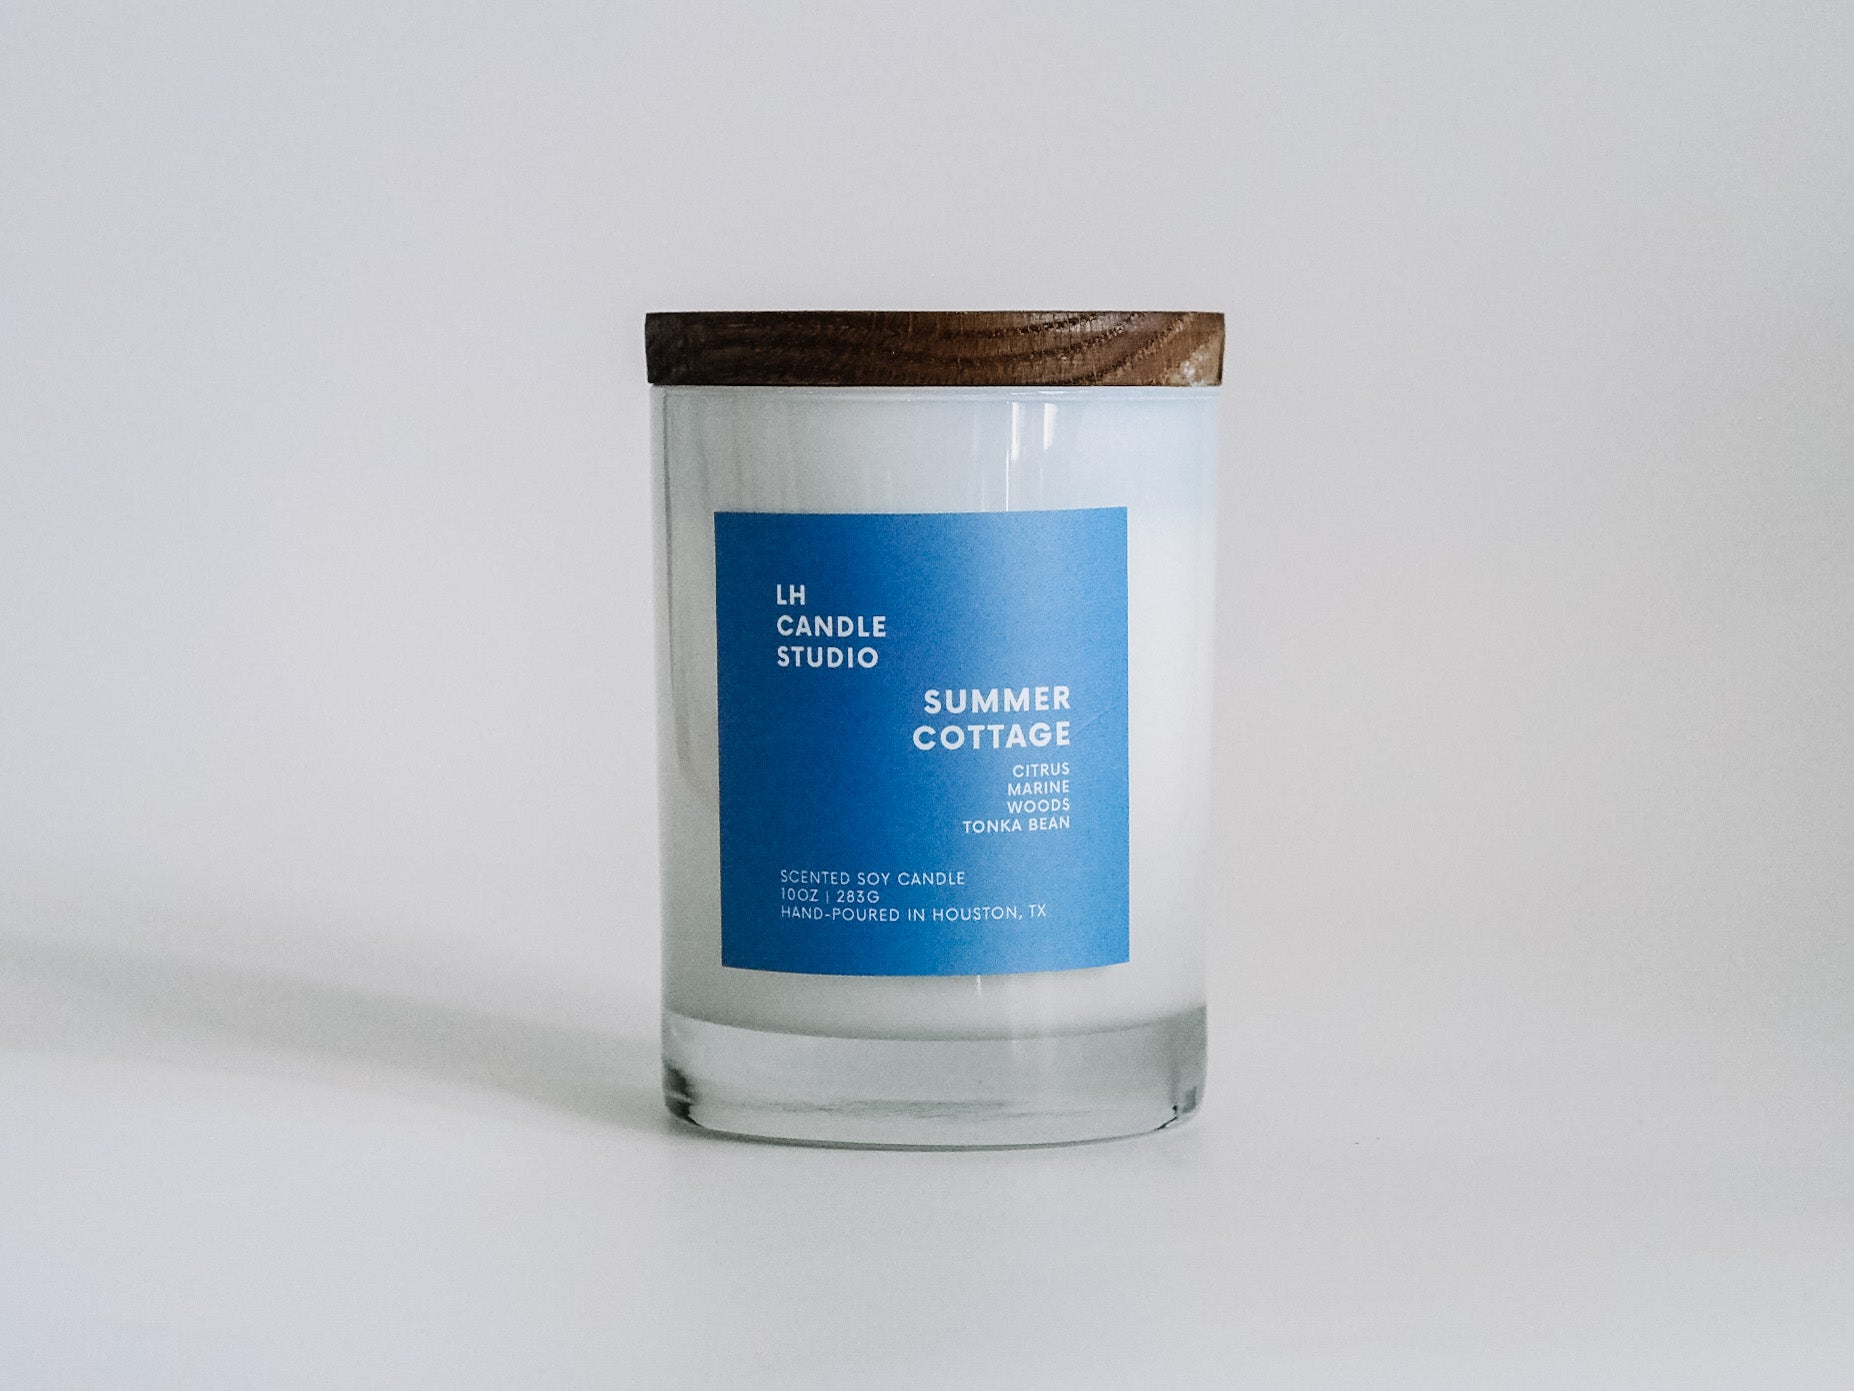 Summer Cottage Candle - LH CANDLE STUDIO